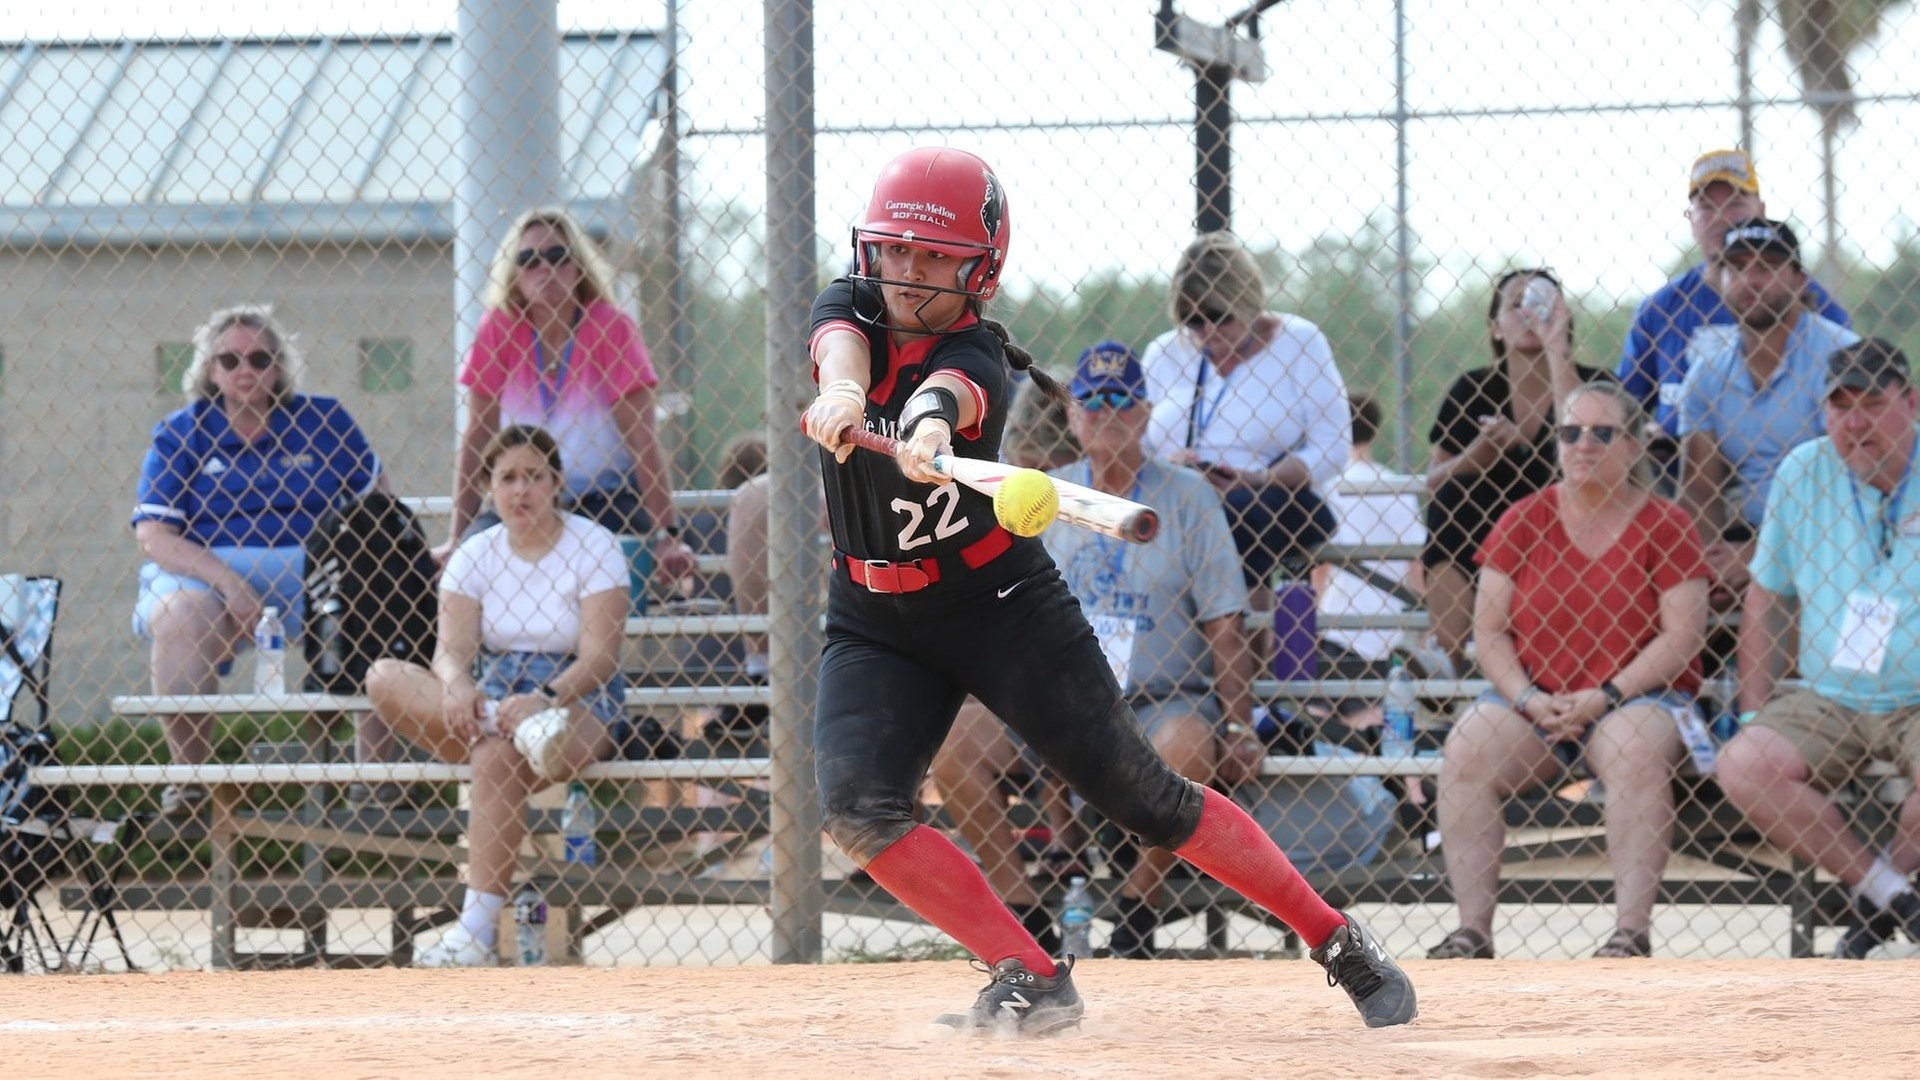 left-handed softball batter reaching bat out to hit ball